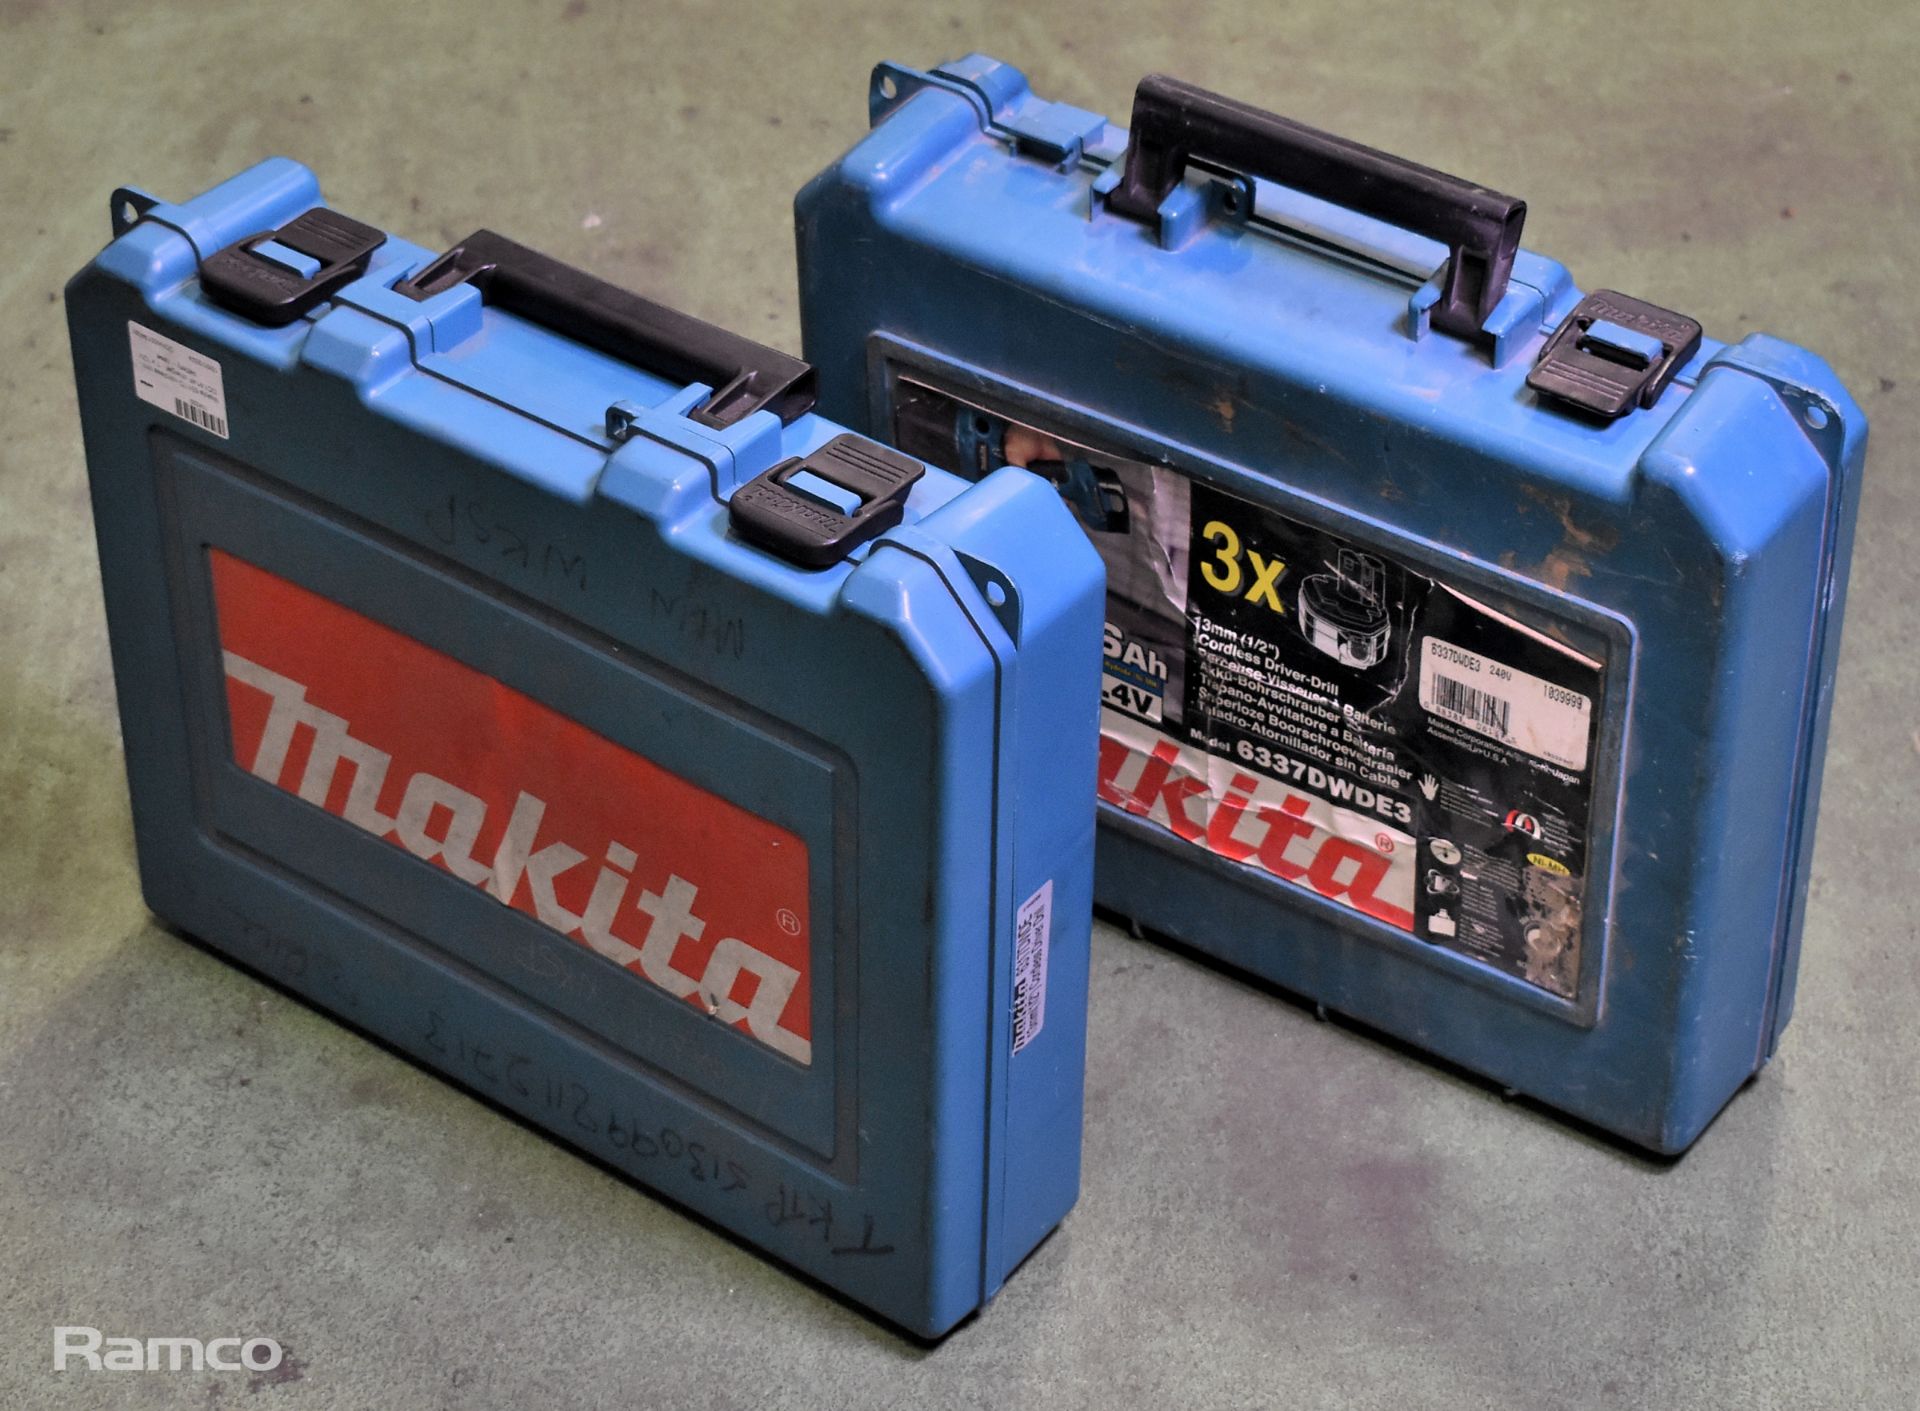 2x Makita 6317D cordless drills - DC1414F charger - 1x 12V battery - case - Image 8 of 8